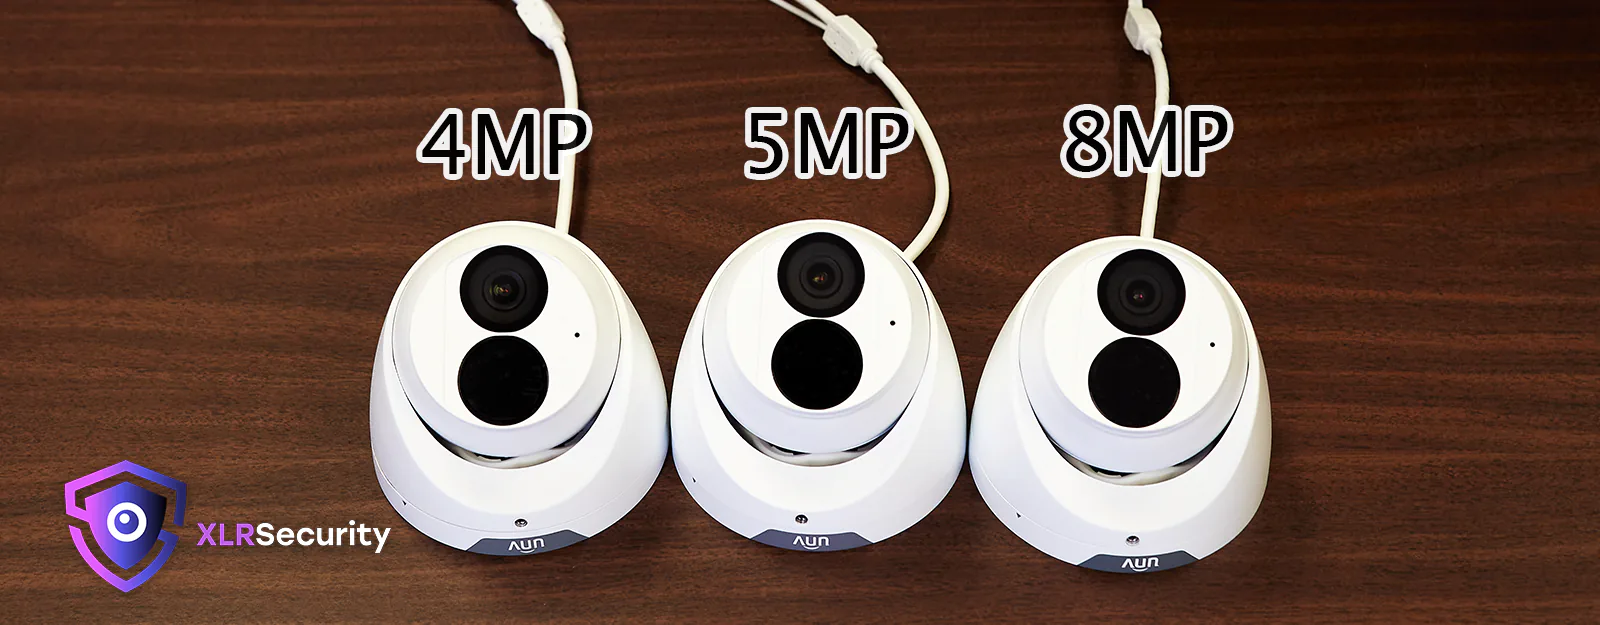 You are currently viewing 4MP vs 5MP vs 8MP Security Cameras – Image Comparison